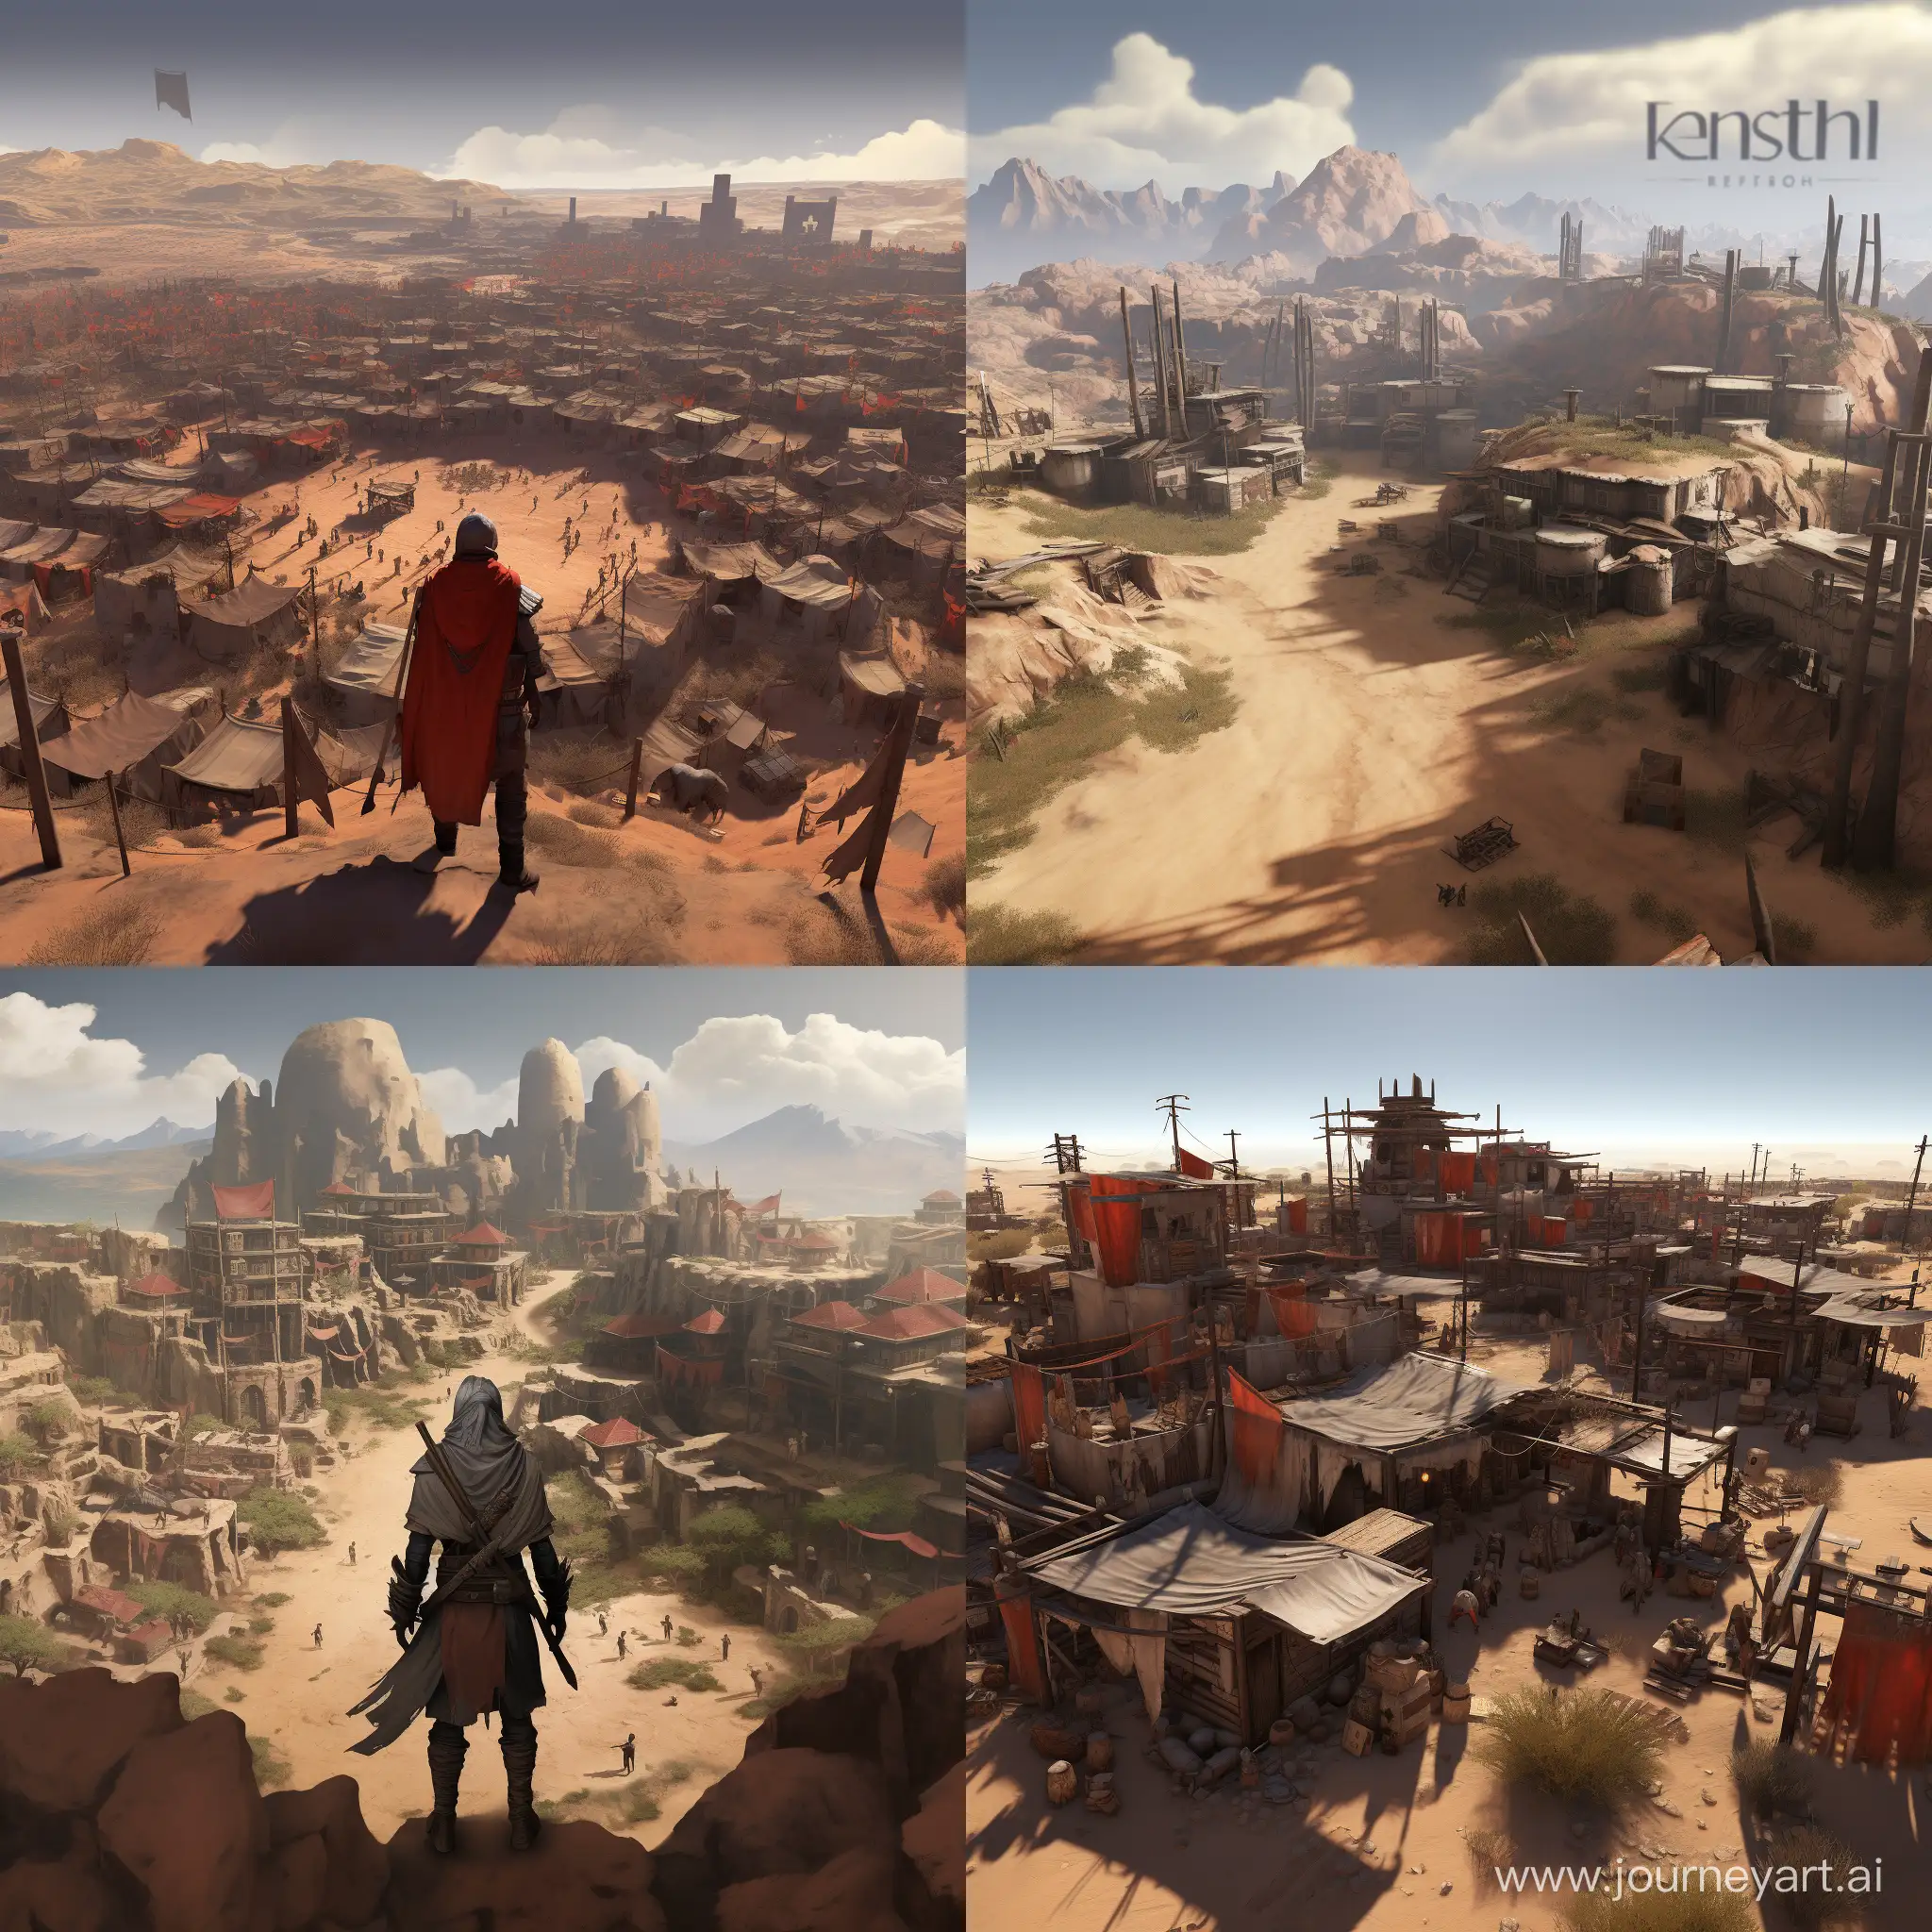 Exploring-the-Kenshi-Game-World-in-a-11-Artistic-Rendering